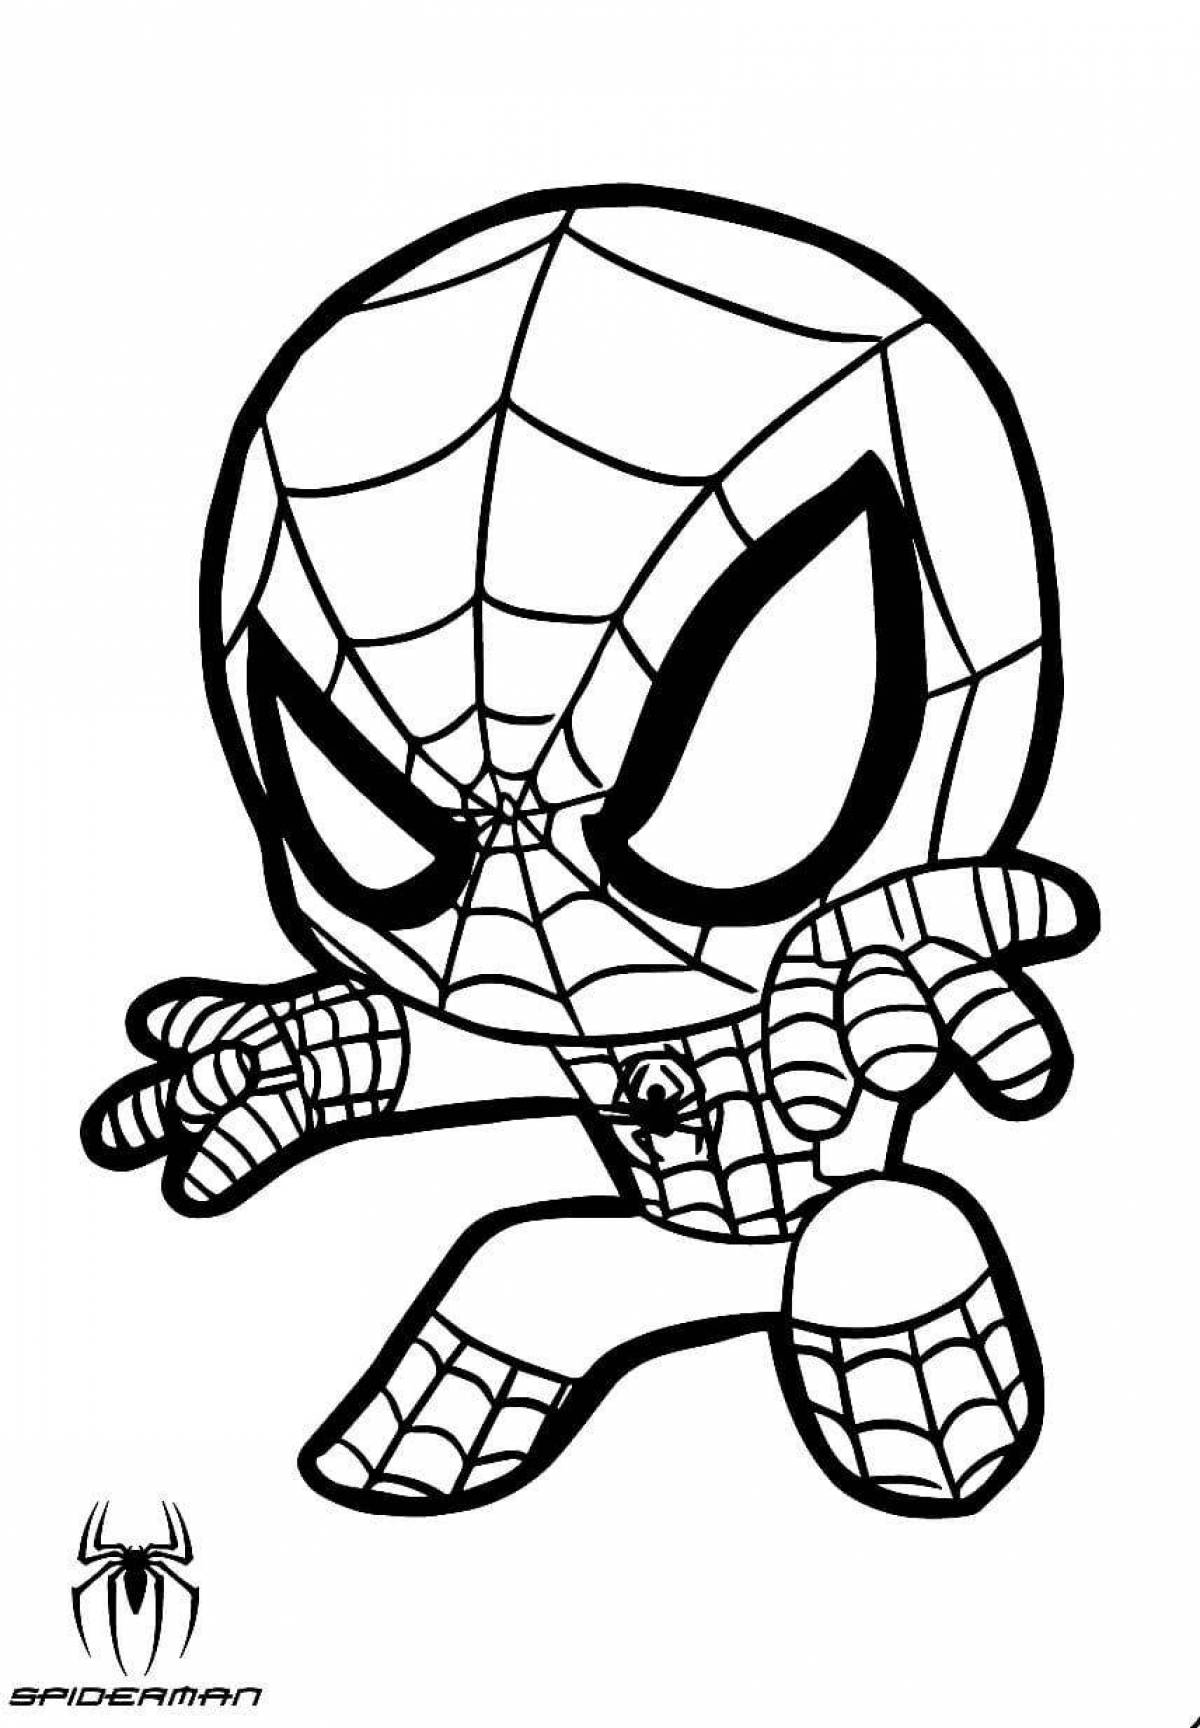 Spiderman's living mask coloring book